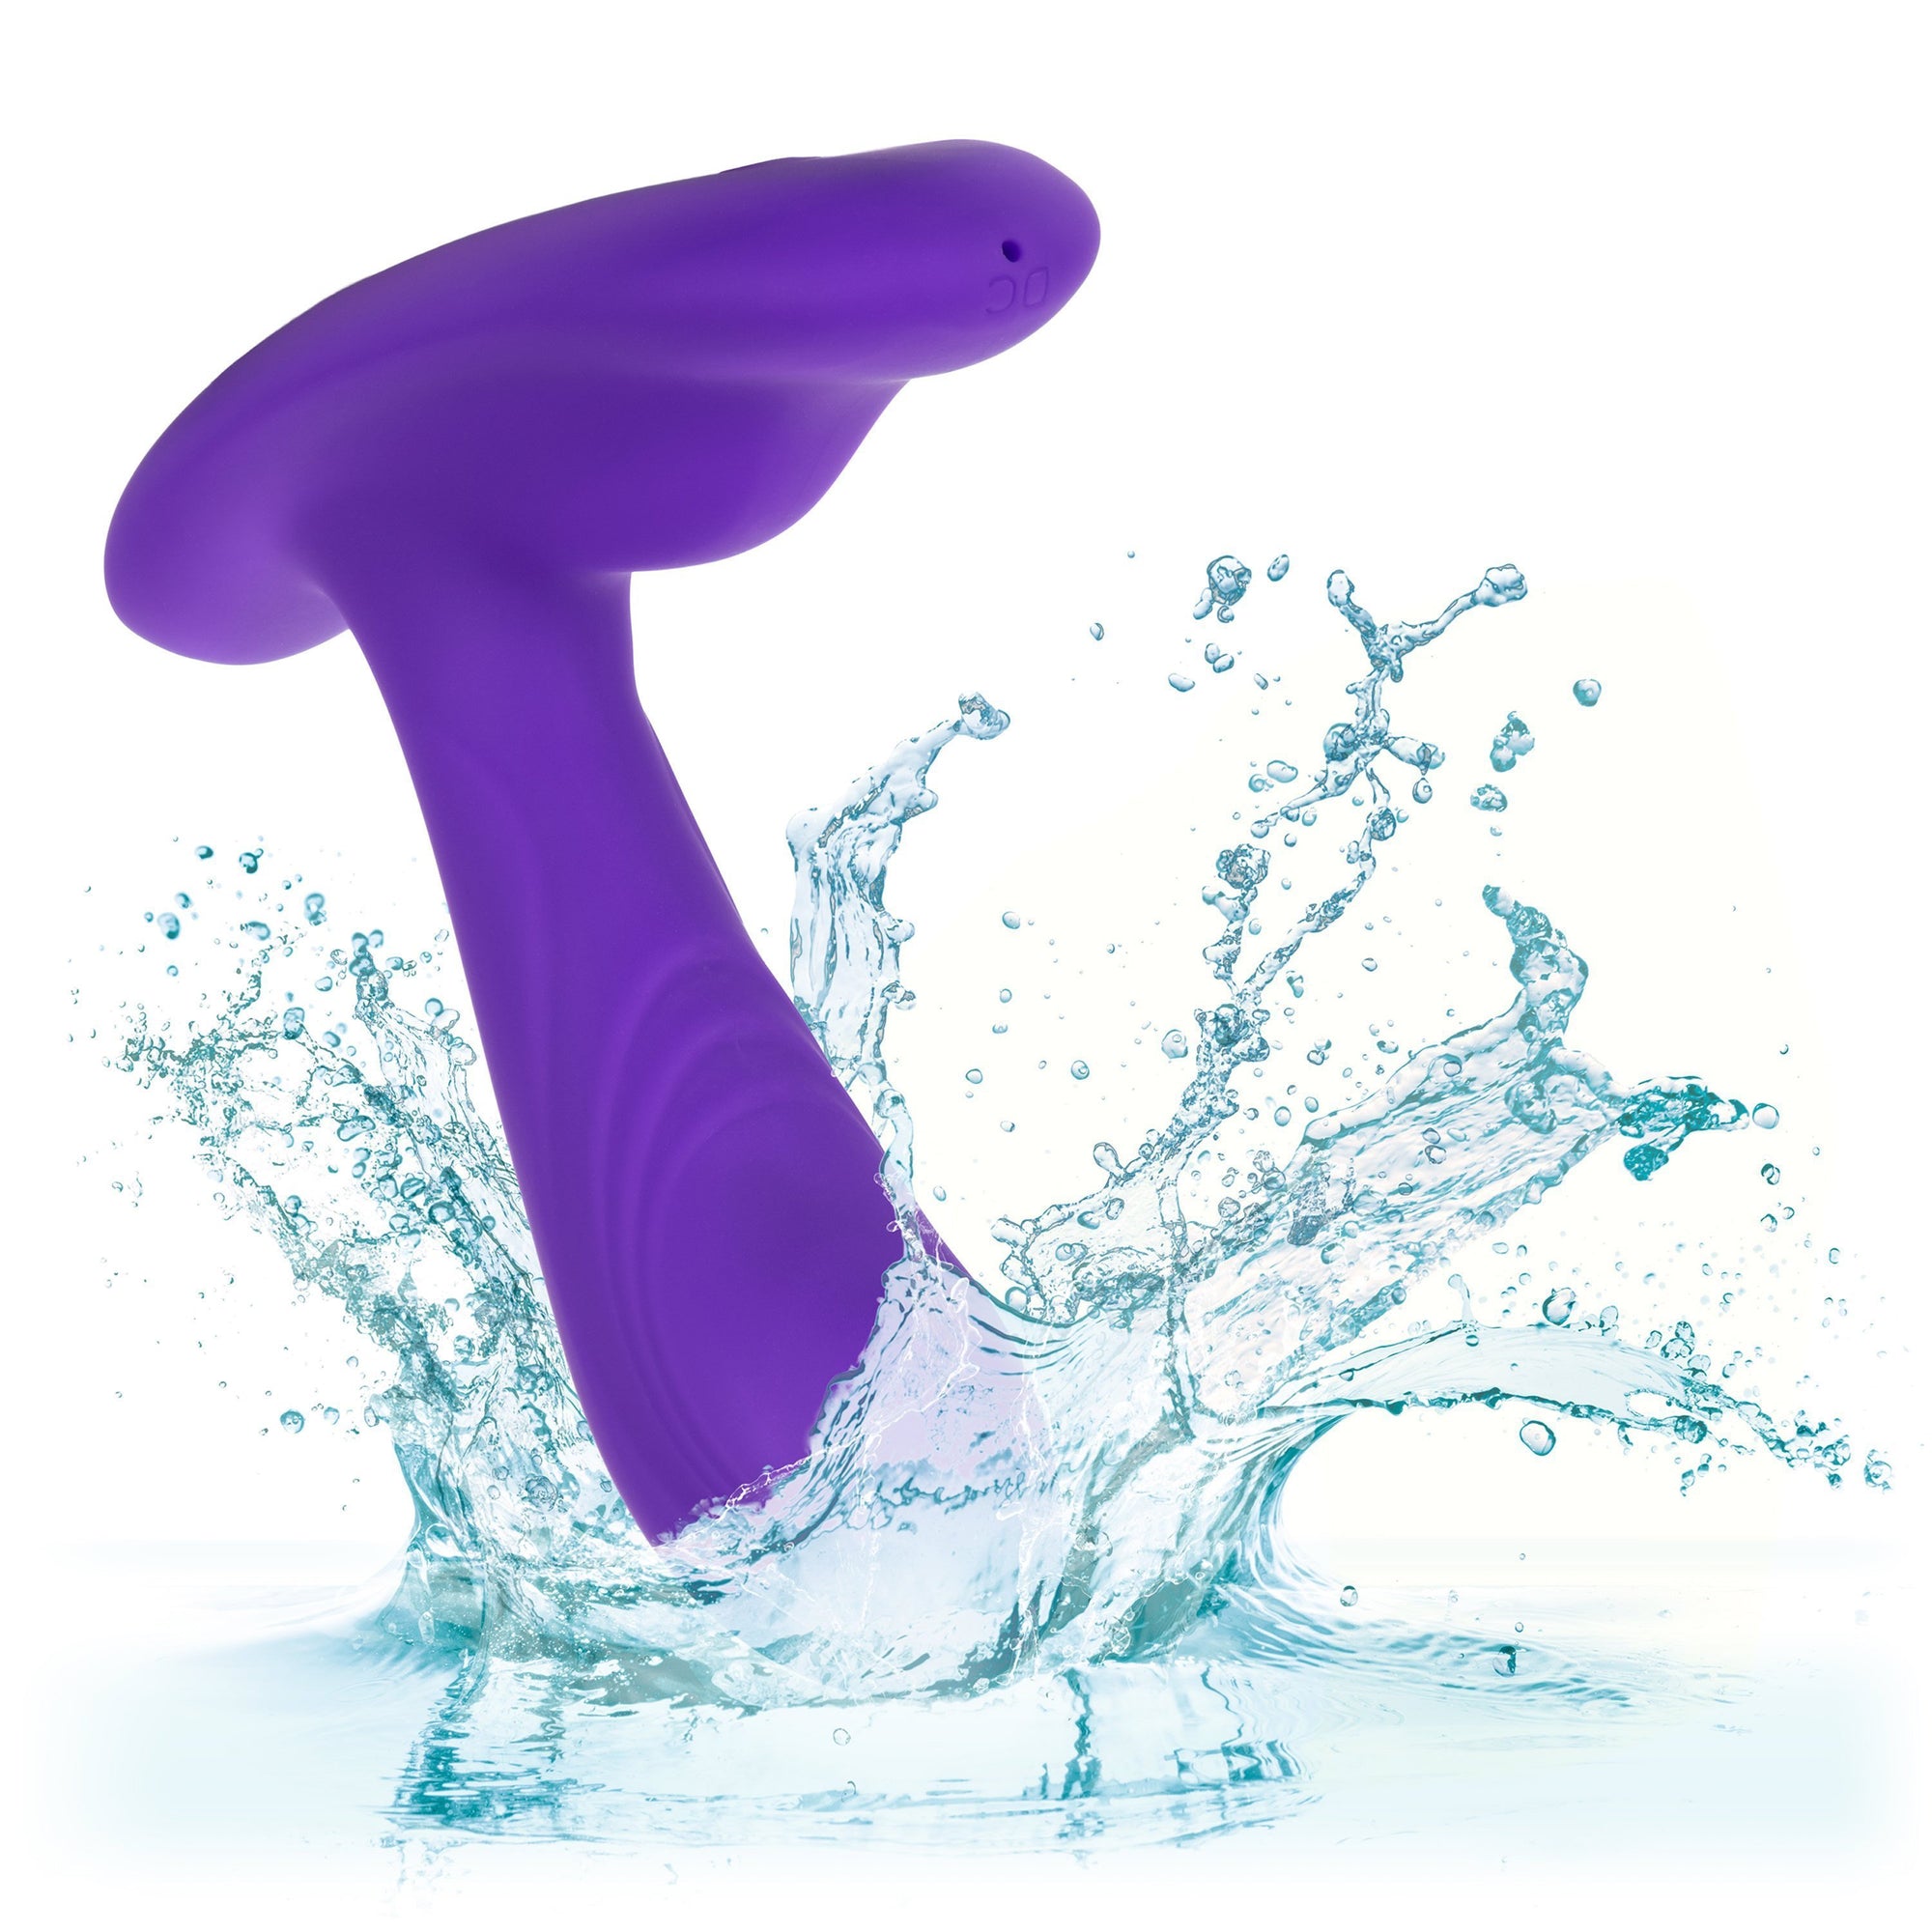 California Exotics - Silicone Remote Pinpoint Pleaser Prostate Massager (Purple) Prostate Massager (Vibration) Rechargeable